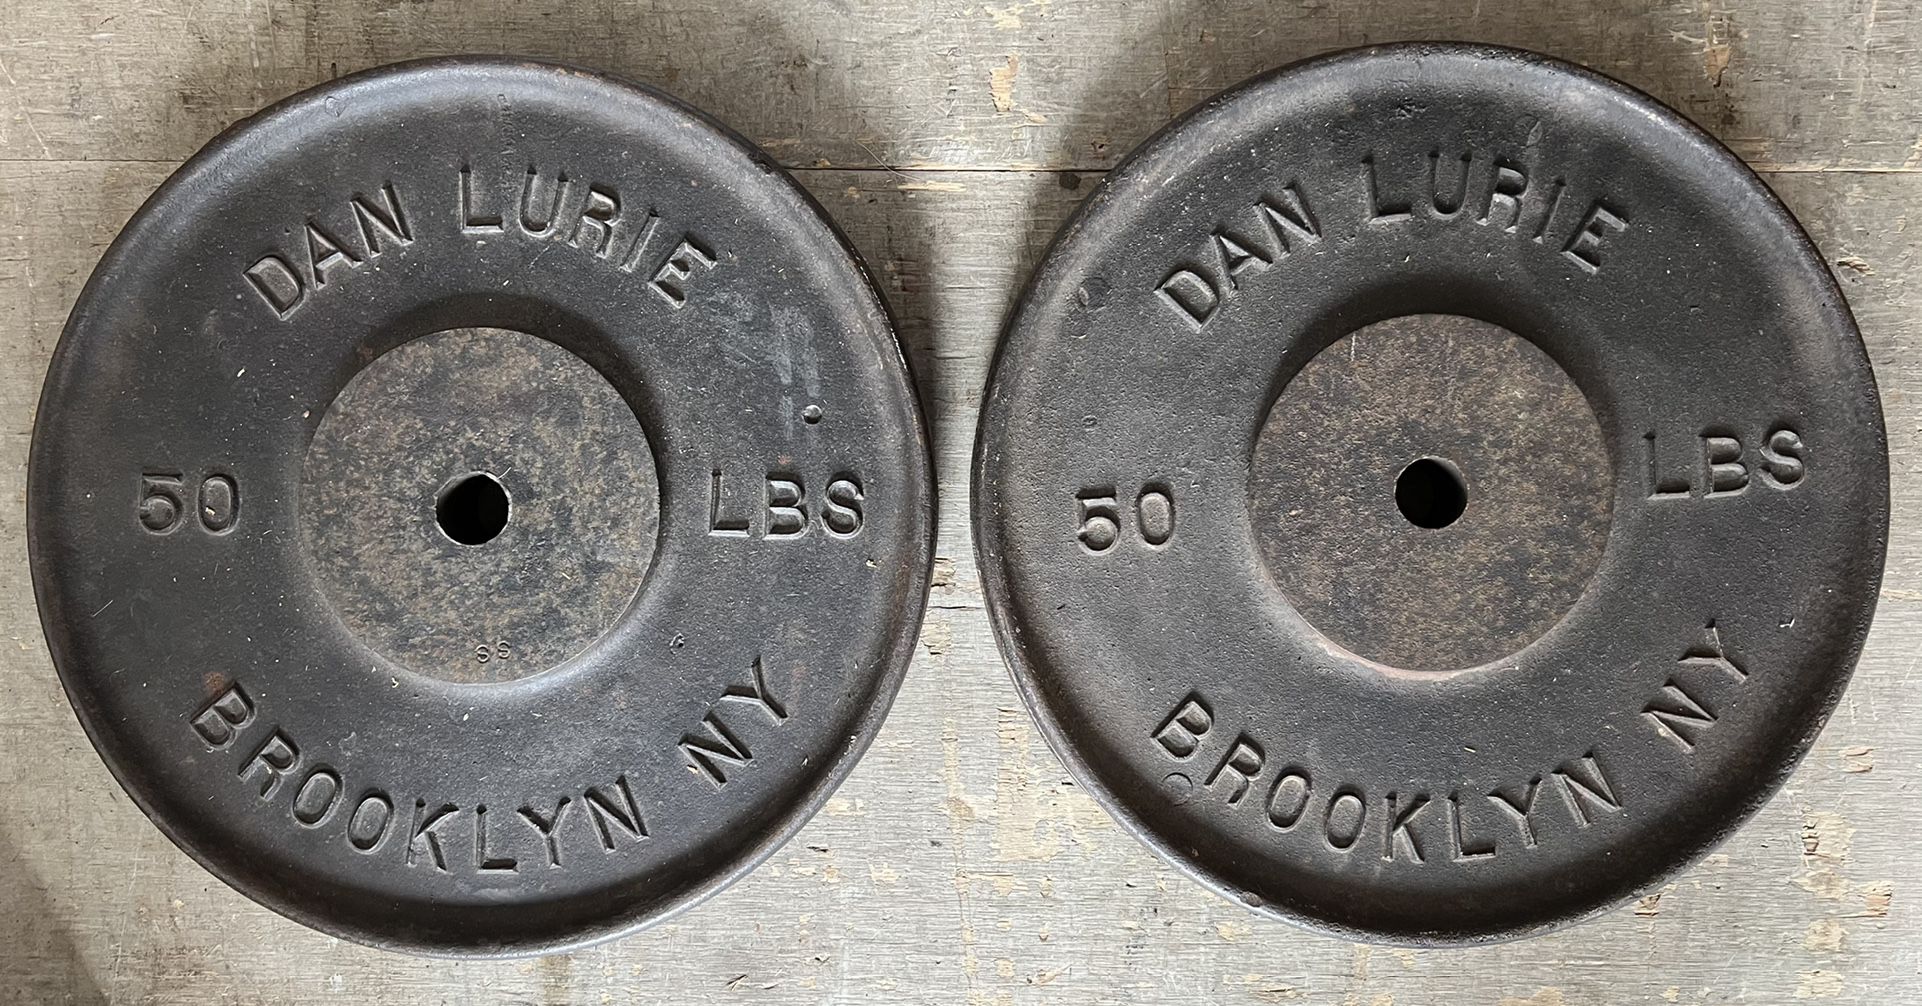 2 Vintage Dan Lurie 50 pound weights, Brooklyn NY